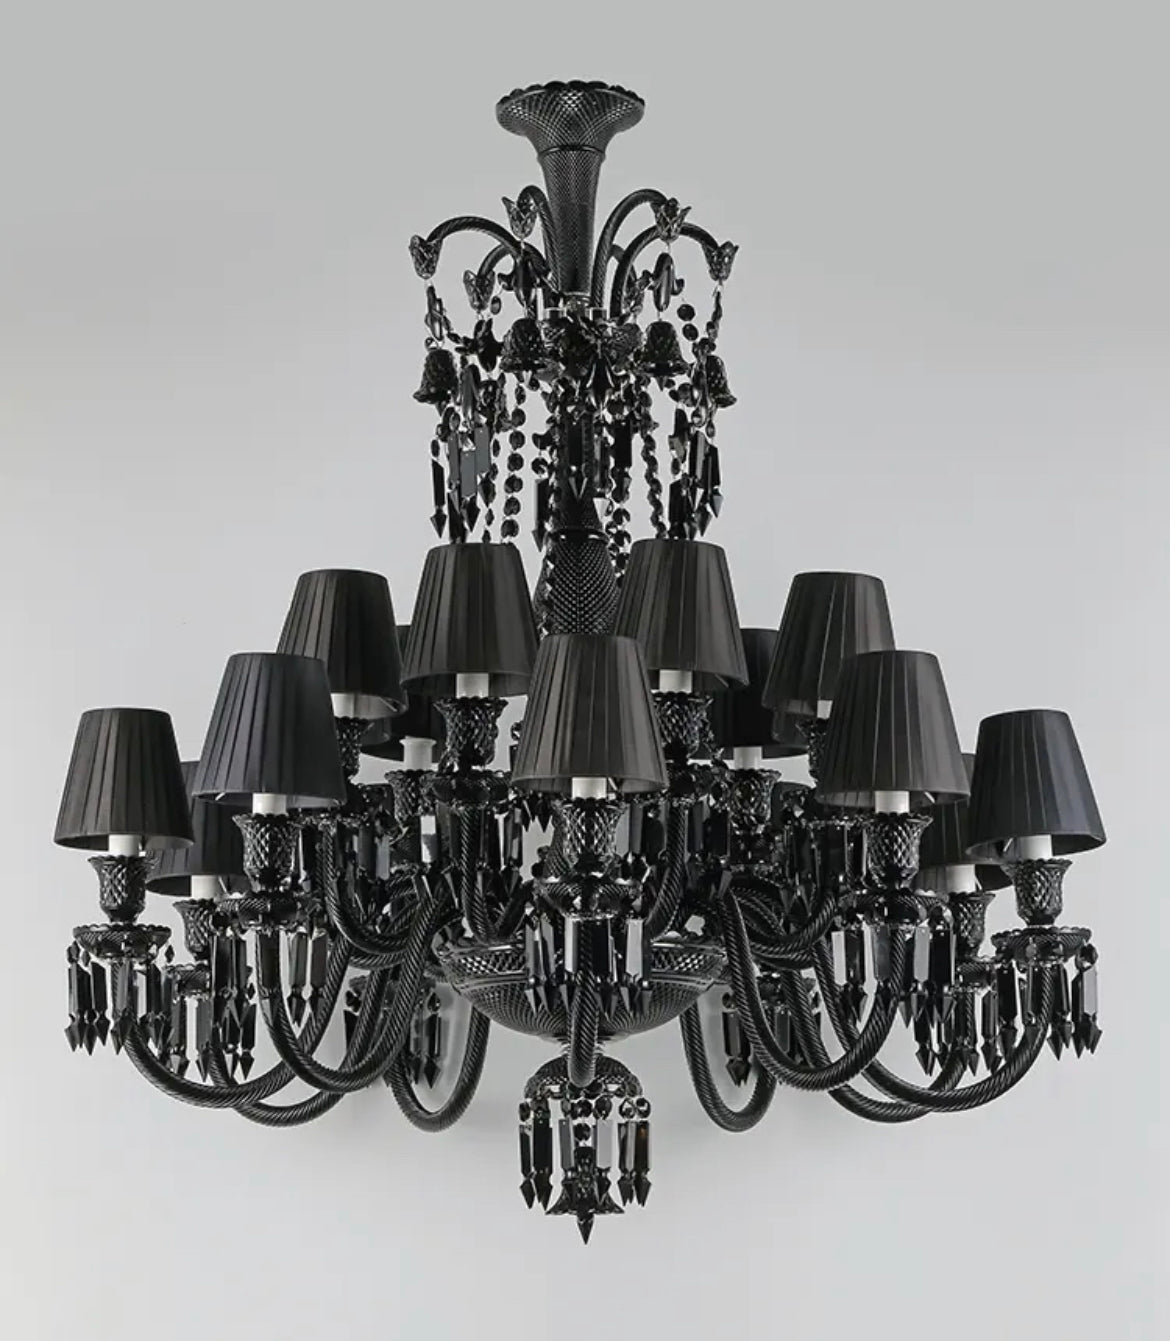 Chandelier French Style Luxury 18 Lights Black Crystal Chandelier Lights